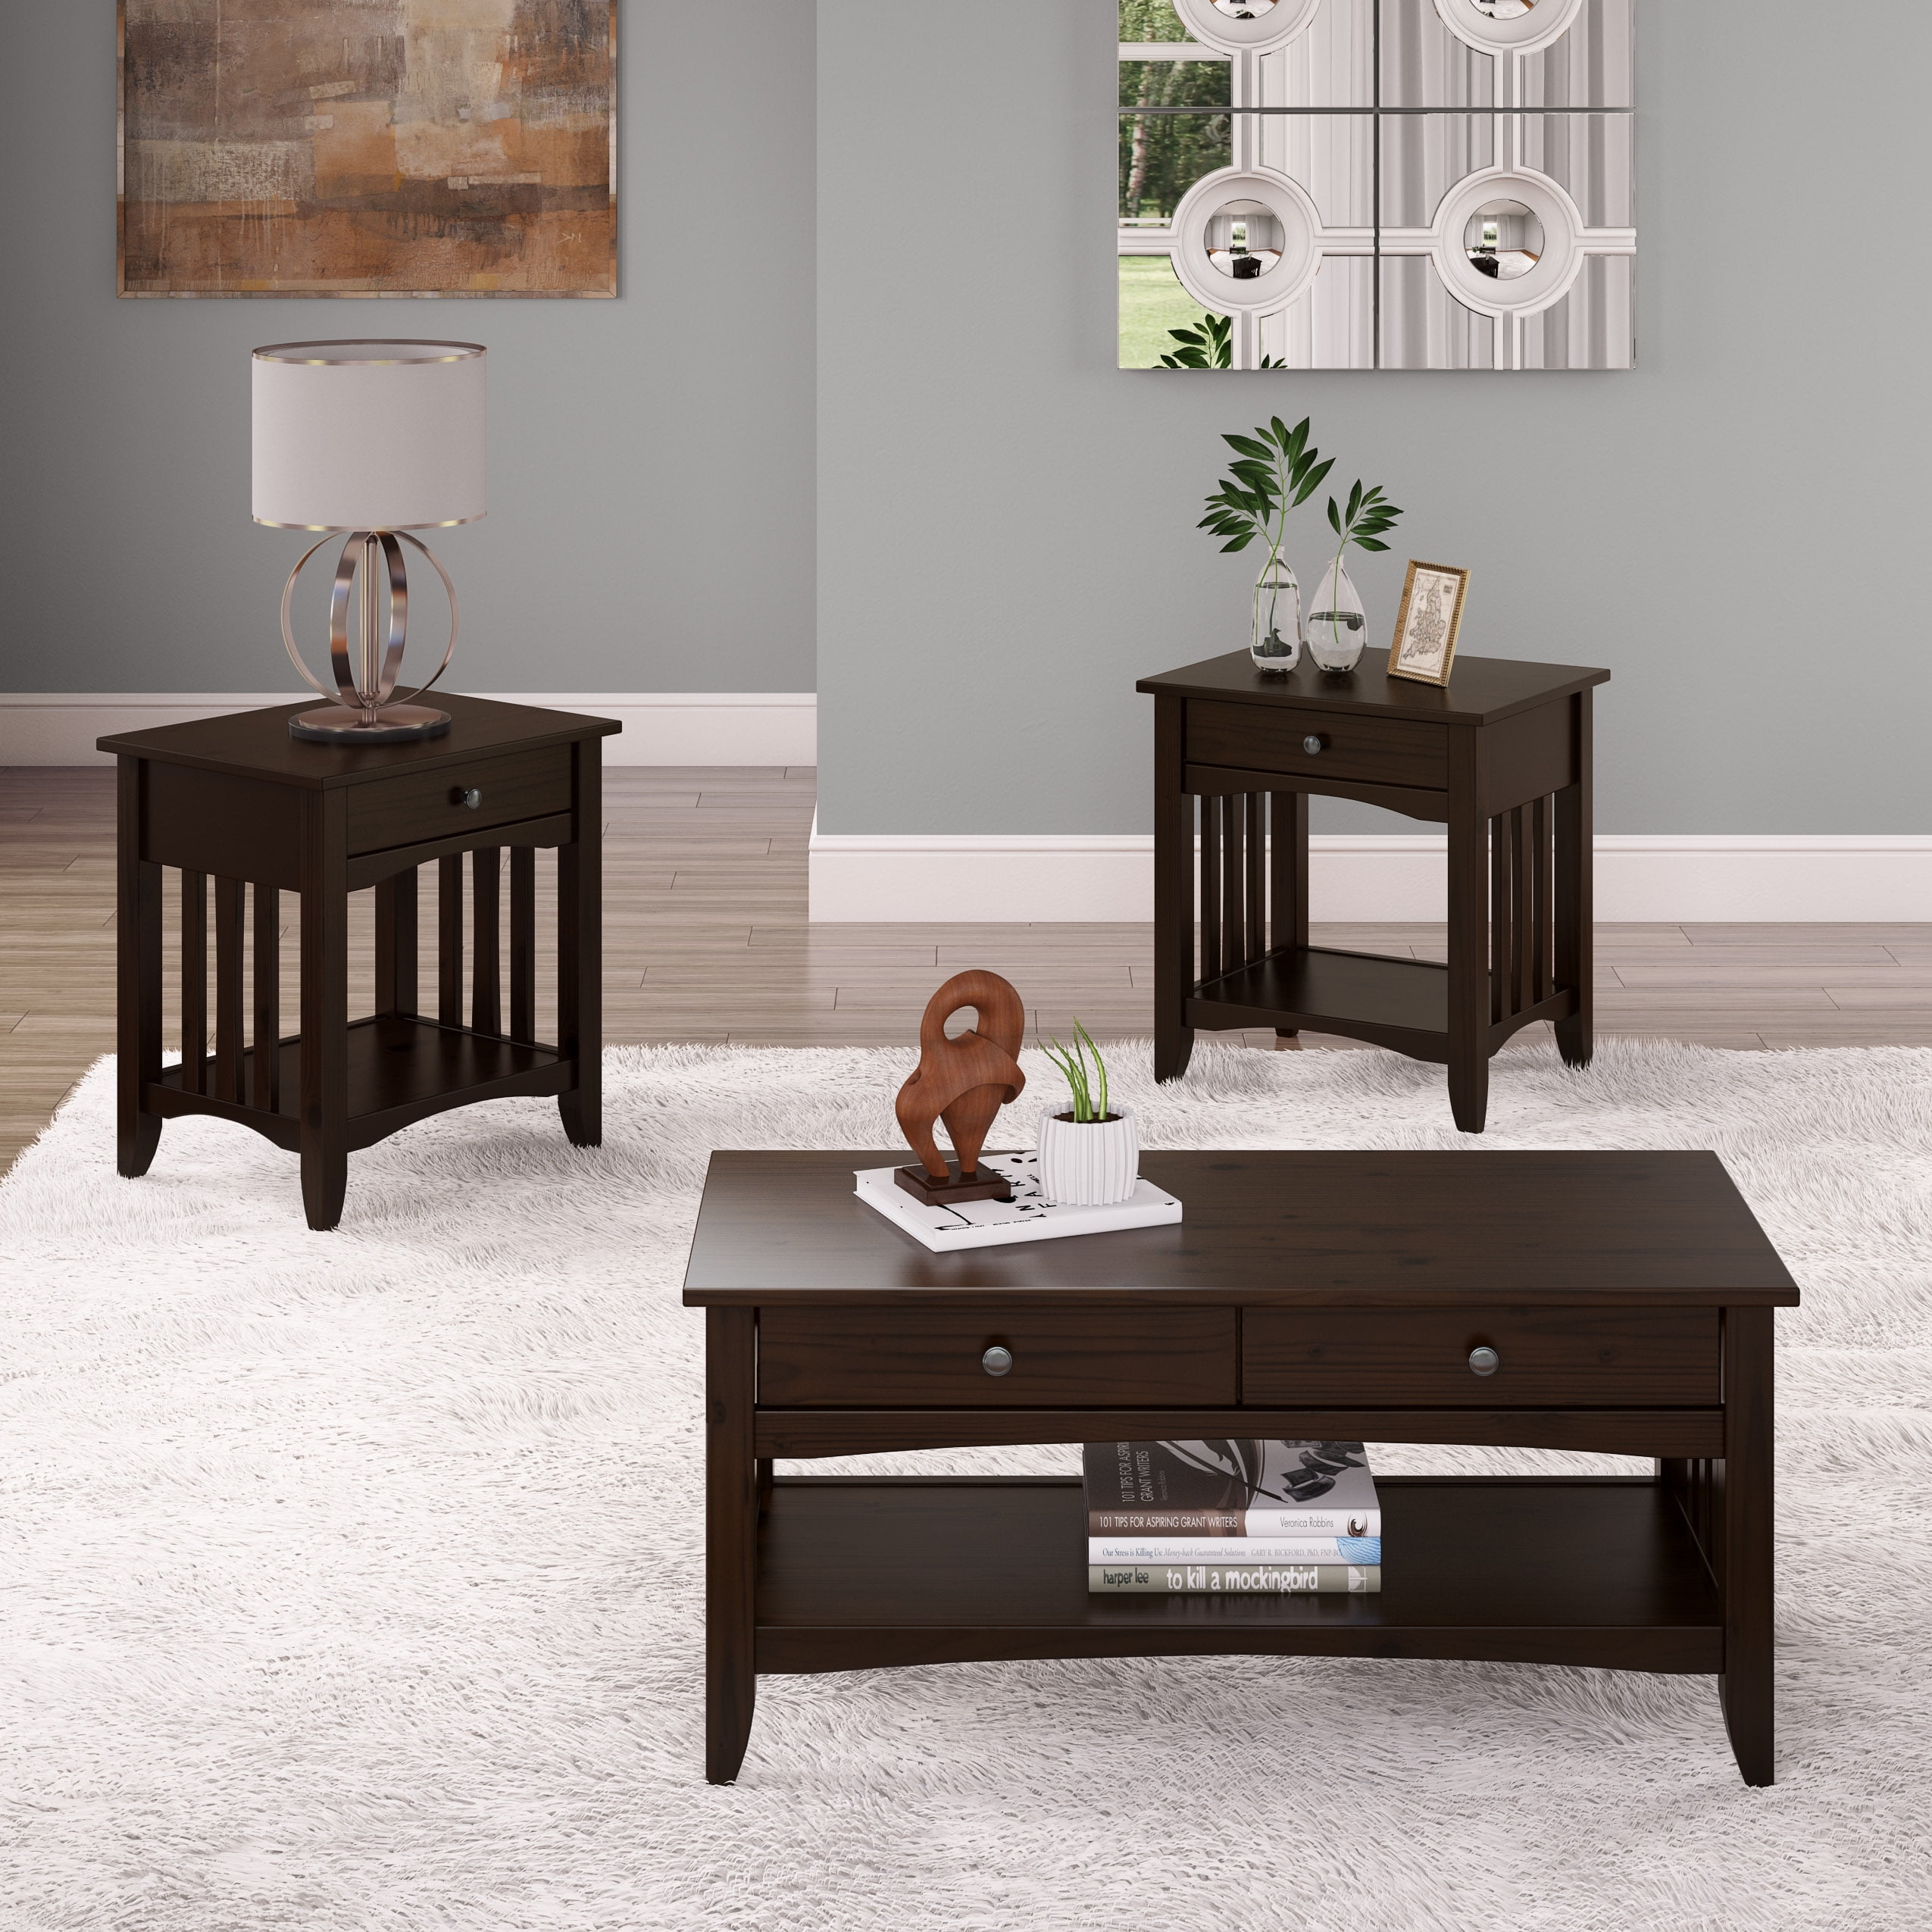 Corliving Crestway 3pc Solid Wood Coffee Table And End Tables Set With Drawers Walmart Com Walmart Com